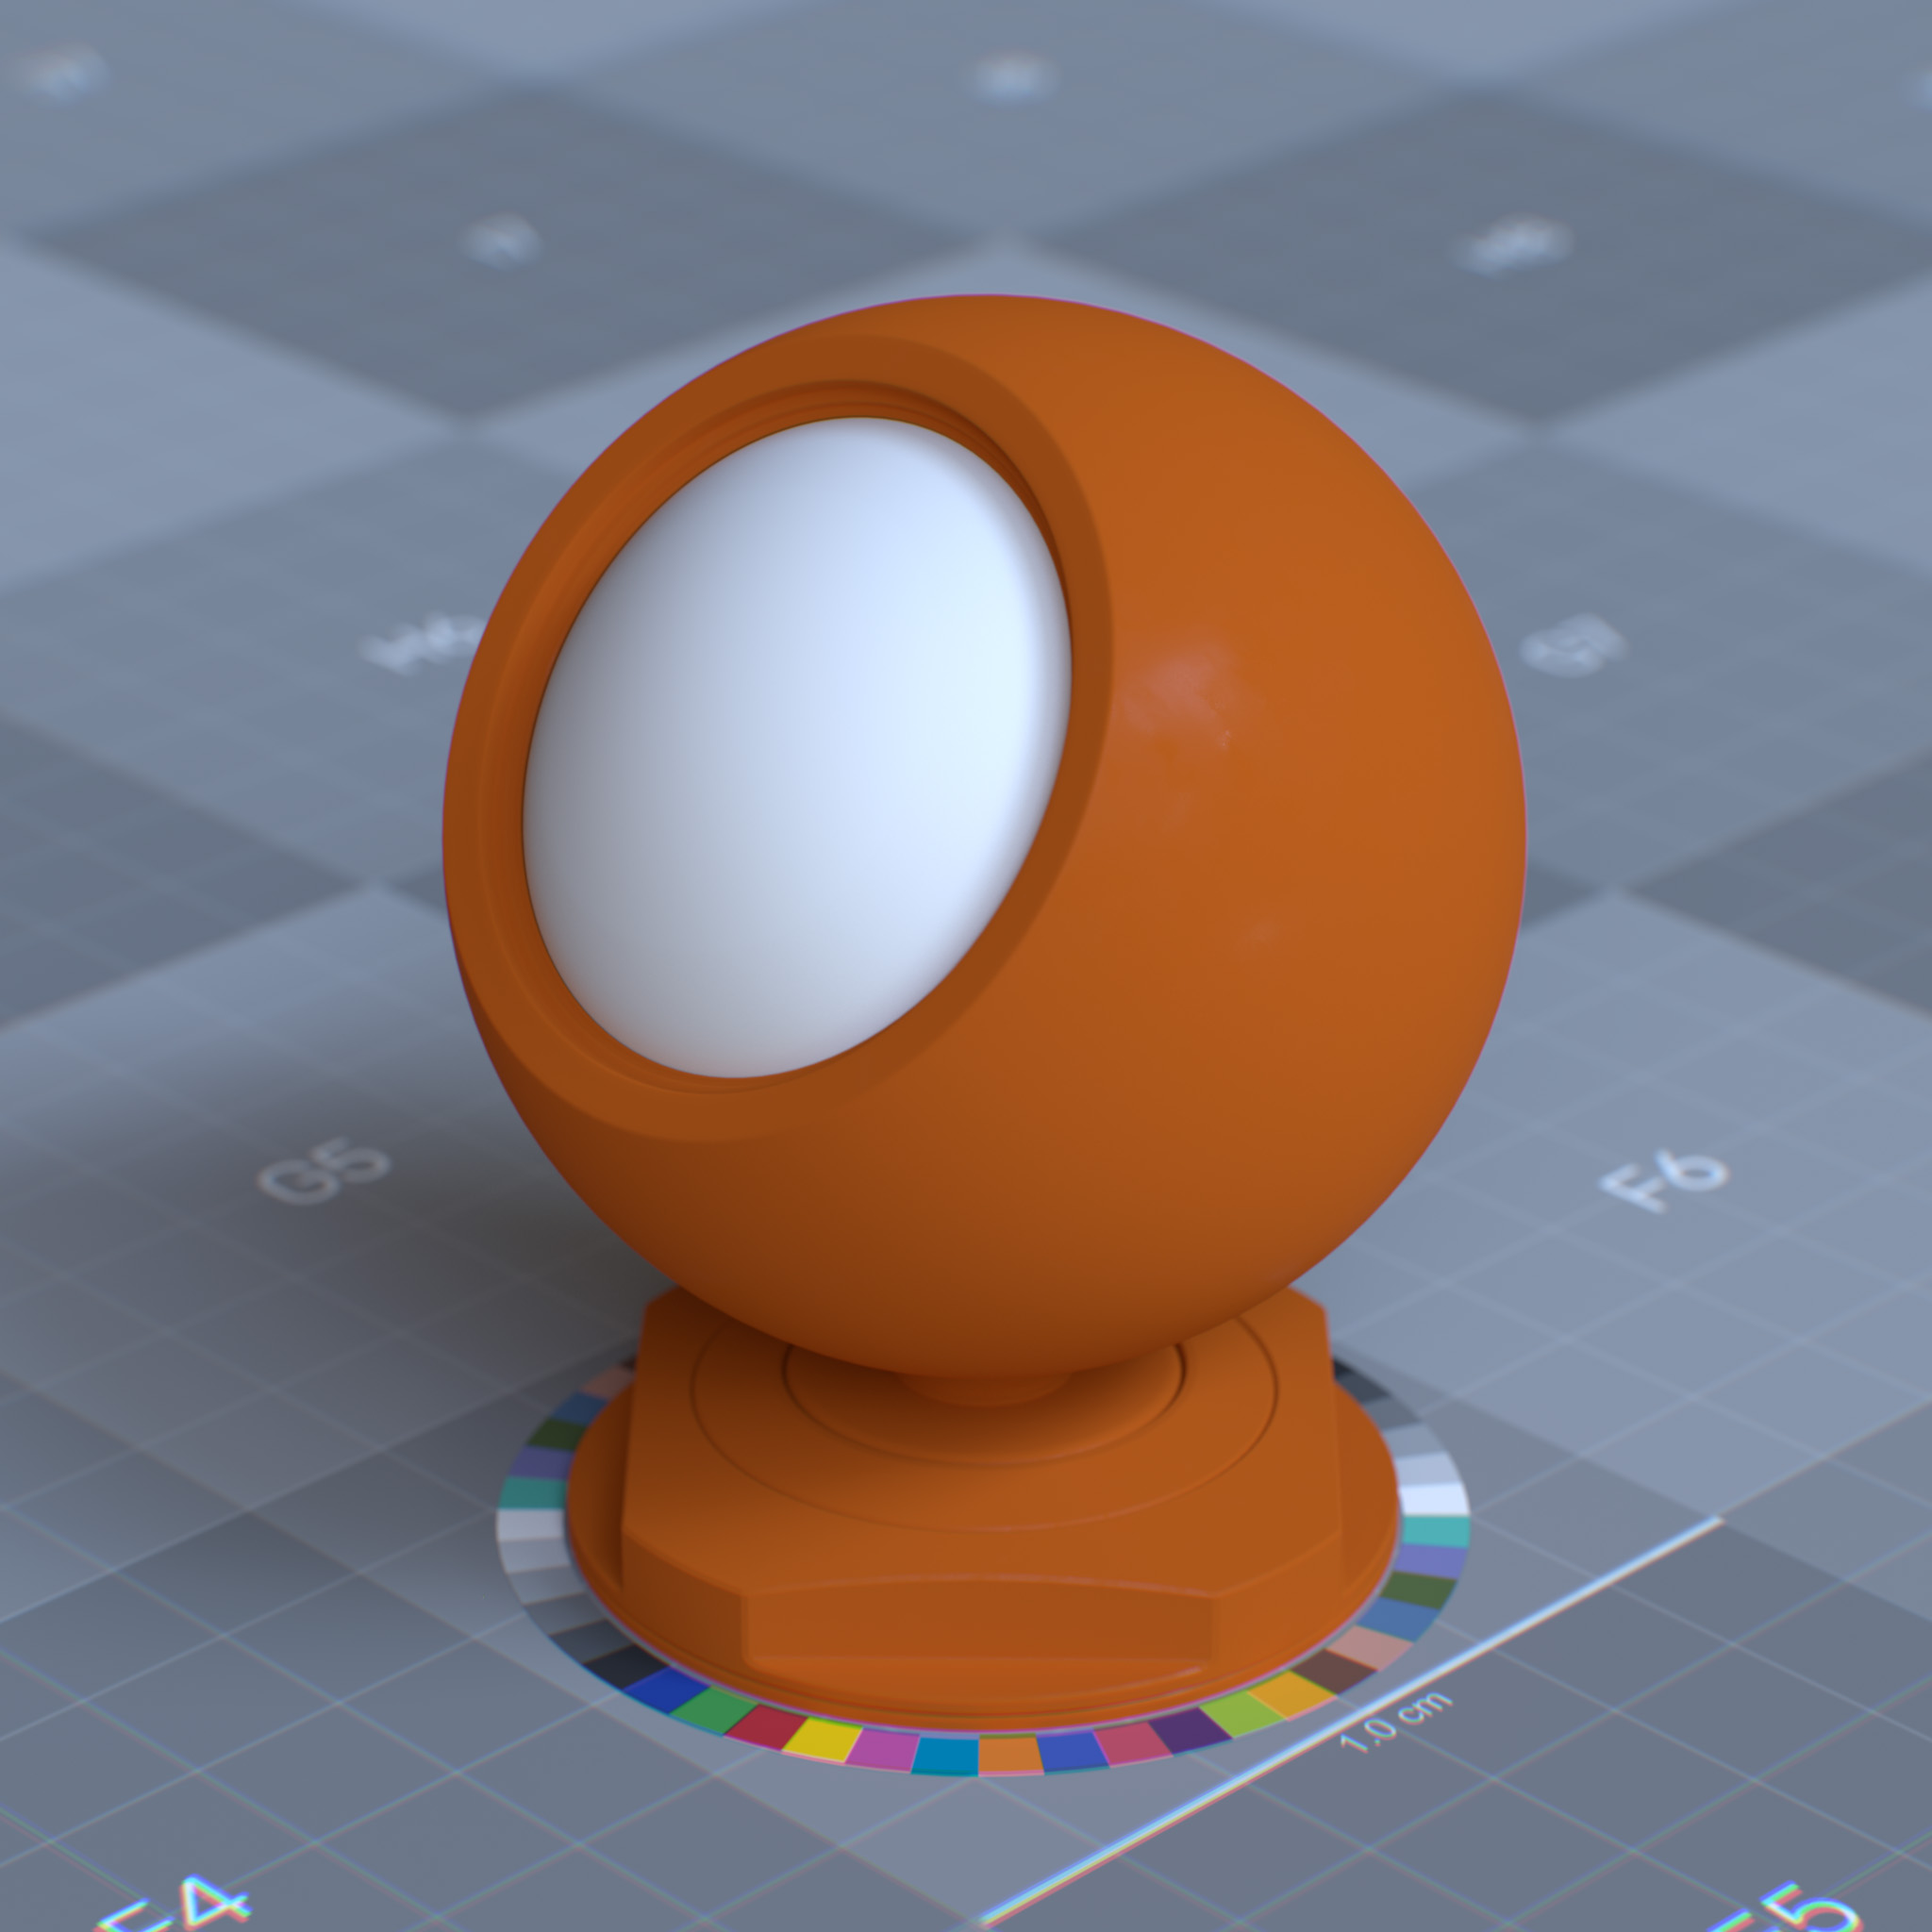 rtx_material_omnisurfacebase_diffuse_reflection_roughness_0p5